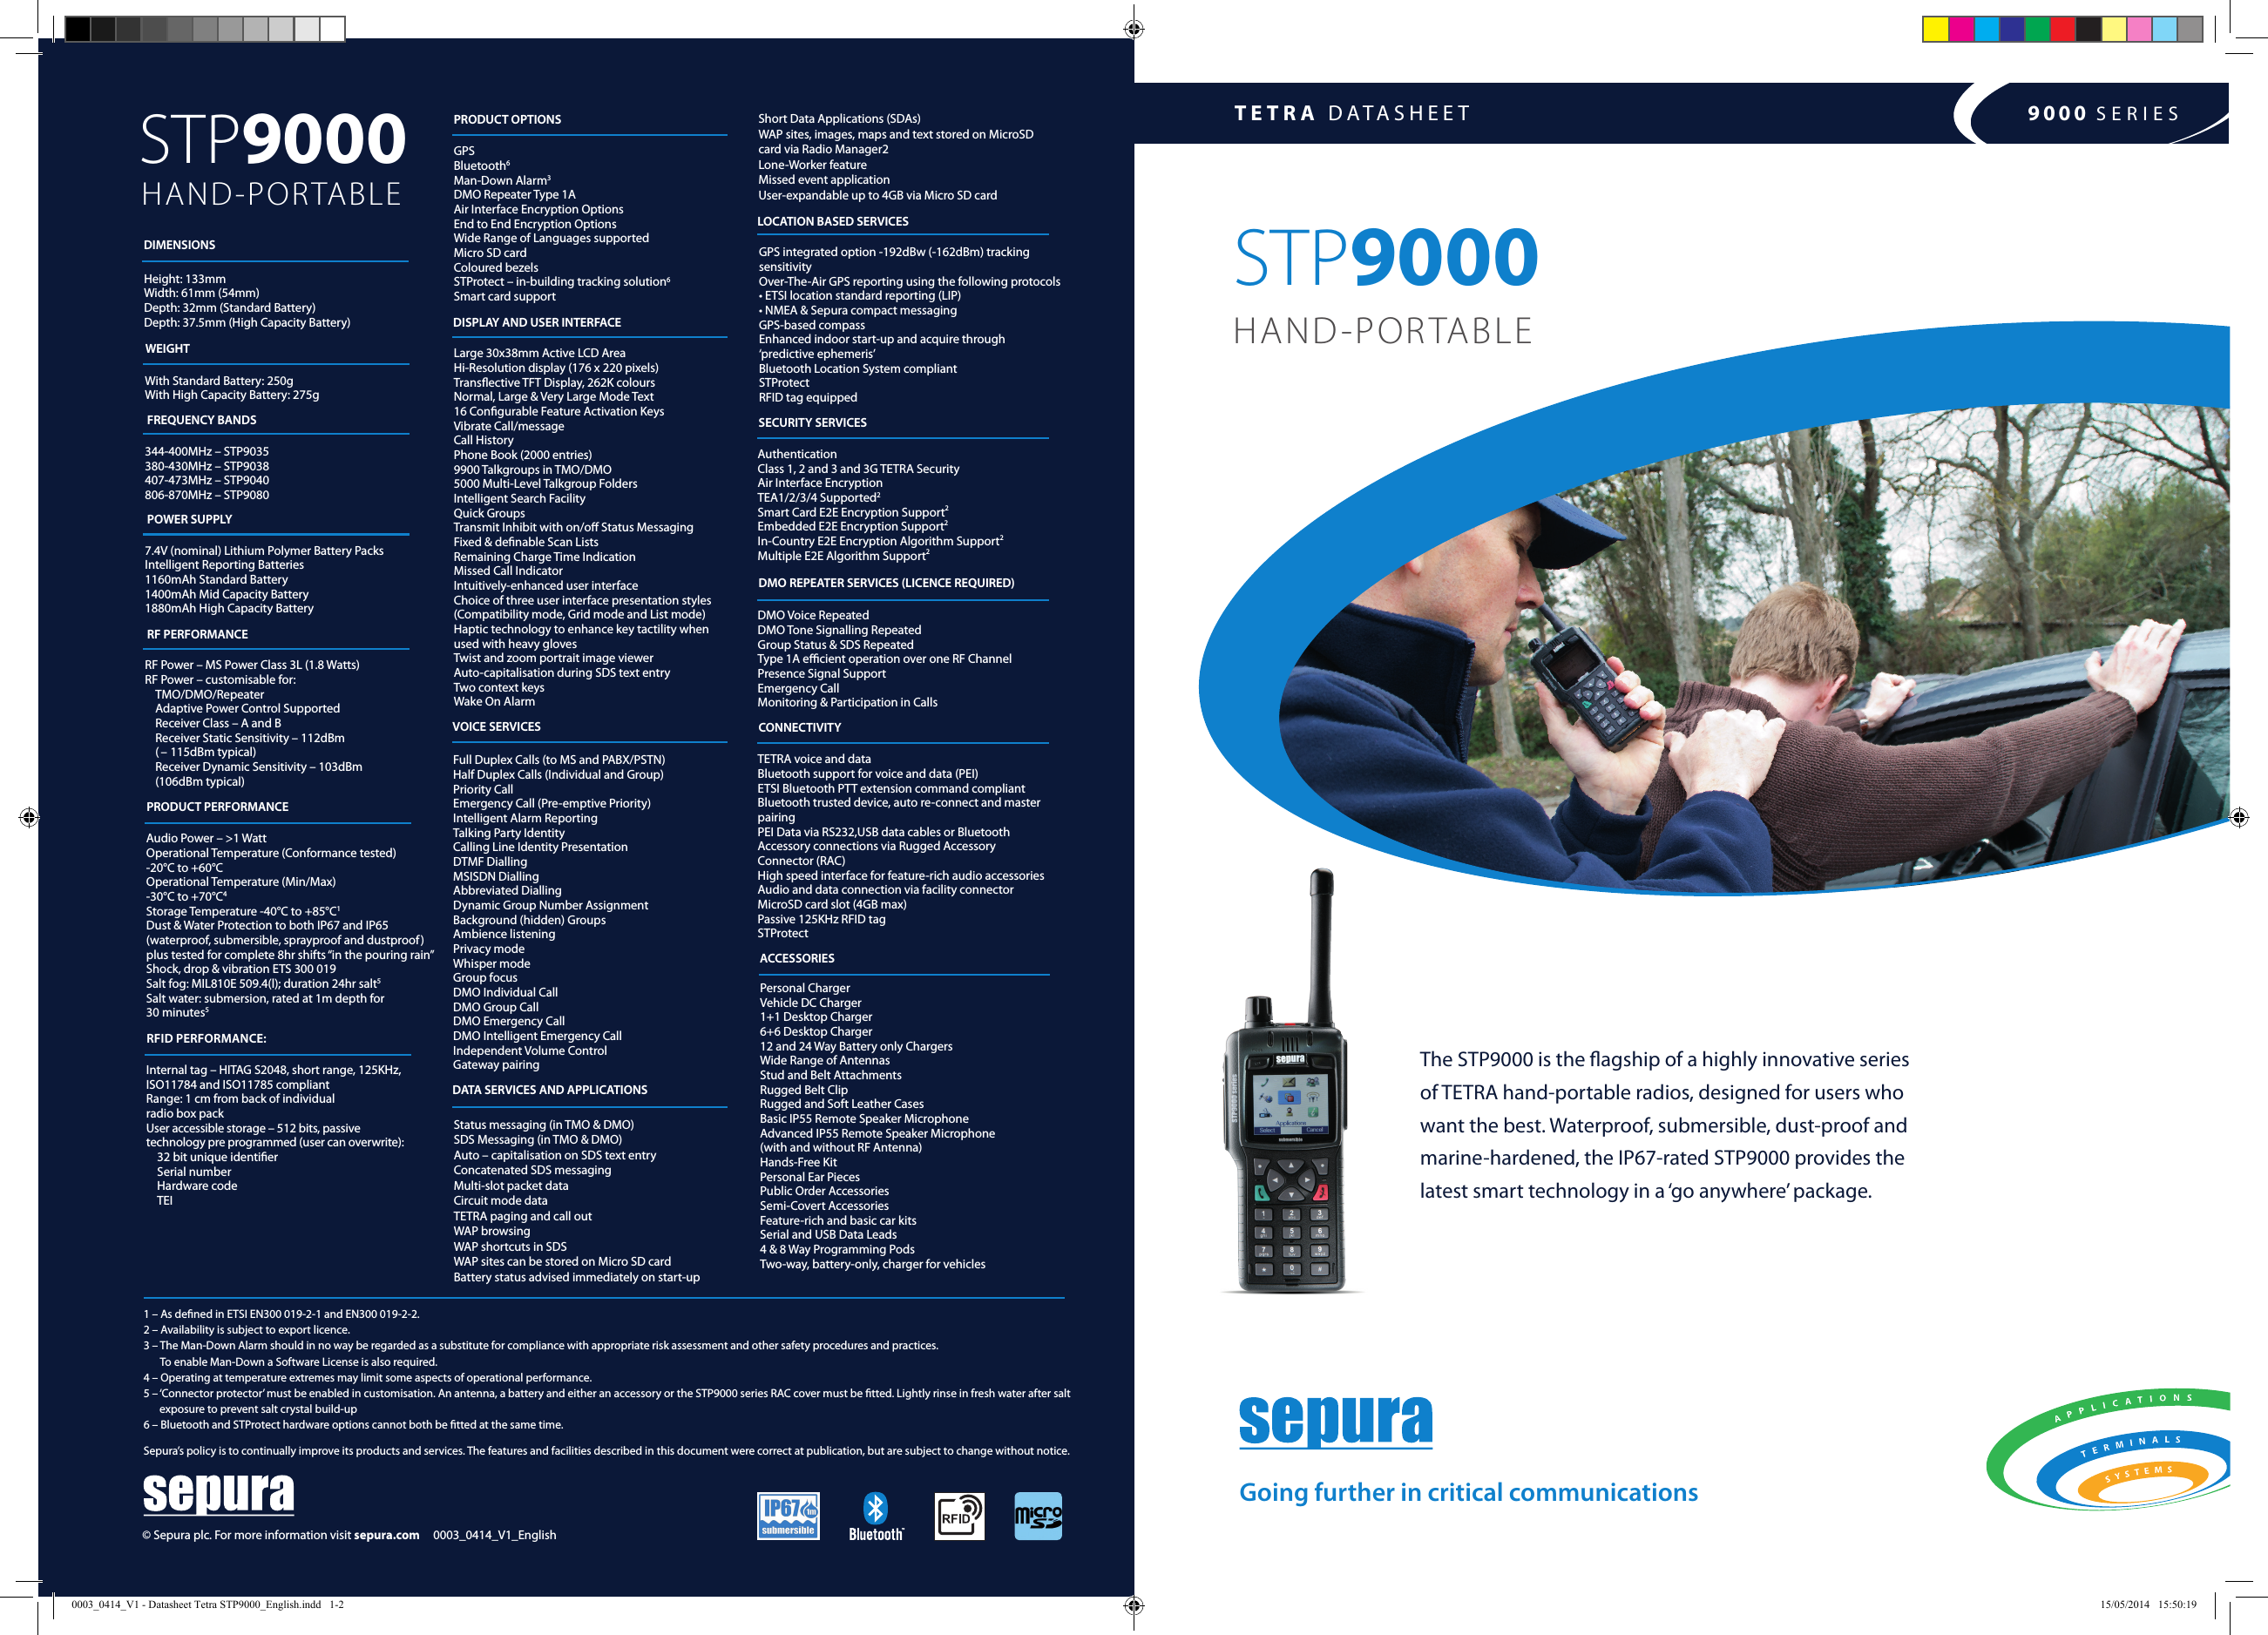 TETRA DATASHEET 9000 SERIESThe STP9000 is the agship of a highly innovative series  of TETRA hand-portable radios, designed for users who  want the best. Waterproof, submersible, dust-proof and marine-hardened, the IP67-rated STP9000 provides the  latest smart technology in a ‘go anywhere’ package.Going further in critical communicationsSTP9000HAND-PORTABLESTP9000  HAND-PORTABLE1 – As dened in ETSI EN300 019-2-1 and EN300 019-2-2. 2 – Availability is subject to export licence. 3 –  The Man-Down Alarm should in no way be regarded as a substitute for compliance with appropriate risk assessment and other safety procedures and practices.  To enable Man-Down a Software License is also required. 4 – Operating at temperature extremes may limit some aspects of operational performance. 5 –  ‘Connector protector’ must be enabled in customisation. An antenna, a battery and either an accessory or the STP9000 series RAC cover must be tted. Lightly rinse in fresh water after salt exposure to prevent salt crystal build-up6 – Bluetooth and STProtect hardware options cannot both be tted at the same time.Sepura’s policy is to continually improve its products and services. The features and facilities described in this document were correct at publication, but are subject to change without notice.  RFID PERFORMANCE:Internal tag – HITAG S2048, short range, 125KHz, ISO11784 and ISO11785 compliantRange: 1 cm from back of individual  radio box pack User accessible storage – 512 bits, passive technology pre programmed (user can overwrite):    32 bit unique identier  Serial number   Hardware code TEIPRODUCT PERFORMANCEAudio Power – &gt;1 WattOperational Temperature (Conformance tested)  -20°C to +60°C Operational Temperature (Min/Max) -30°C to +70°C4Storage Temperature -40°C to +85°C1Dust &amp; Water Protection to both IP67 and IP65  (waterproof, submersible, sprayproof and dustproof) plus tested for complete 8hr shifts “in the pouring rain”Shock, drop &amp; vibration ETS 300 019 Salt fog: MIL810E 509.4(l); duration 24hr salt5Salt water: submersion, rated at 1m depth for  30 minutes5RF PERFORMANCERF Power – MS Power Class 3L (1.8 Watts)RF Power – customisable for: TMO/DMO/RepeaterAdaptive Power Control SupportedReceiver Class – A and BReceiver Static Sensitivity – 112dBm  (  –  115dBm typical)Receiver Dynamic Sensitivity – 103dBm  (106dBm typical)POWER SUPPLY7.4V (nominal) Lithium Polymer Battery PacksIntelligent Reporting Batteries1160mAh Standard Battery1400mAh Mid Capacity Battery1880mAh High Capacity Battery344-400MHz – STP9035 380-430MHz – STP9038407-473MHz – STP9040 806-870MHz – STP9080FREQUENCY BANDSWEIGHTWith Standard Battery: 250gWith High Capacity Battery: 275gDIMENSIONSHeight: 133mmWidth: 61mm (54mm)Depth: 32mm (Standard Battery)Depth: 37.5mm (High Capacity Battery)DATA SERVICES AND APPLICATIONSStatus messaging (in TMO &amp; DMO) SDS Messaging (in TMO &amp; DMO) Auto – capitalisation on SDS text entryConcatenated SDS messaging Multi-slot packet dataCircuit mode data TETRA paging and call out WAP browsingWAP shortcuts in SDSWAP sites can be stored on Micro SD cardBattery status advised immediately on start-up VOICE SERVICESFull Duplex Calls (to MS and PABX/PSTN)Half Duplex Calls (Individual and Group)Priority CallEmergency Call (Pre-emptive Priority)Intelligent Alarm ReportingTalking Party IdentityCalling Line Identity PresentationDTMF DiallingMSISDN DiallingAbbreviated DiallingDynamic Group Number AssignmentBackground (hidden) GroupsAmbience listeningPrivacy modeWhisper modeGroup focus DMO Individual CallDMO Group CallDMO Emergency CallDMO Intelligent Emergency CallIndependent Volume ControlGateway pairingDISPLAY AND USER INTERFACELarge 30x38mm Active LCD AreaHi-Resolution display (176 x 220 pixels)Transective TFT Display, 262K coloursNormal, Large &amp; Very Large Mode Text16 Congurable Feature Activation KeysVibrate Call/messageCall HistoryPhone Book (2000 entries)9900 Talkgroups in TMO/DMO5000 Multi-Level Talkgroup FoldersIntelligent Search FacilityQuick GroupsTransmit Inhibit with on/o Status MessagingFixed &amp; denable Scan ListsRemaining Charge Time IndicationMissed Call IndicatorIntuitively-enhanced user interfaceChoice of three user interface presentation styles(Compatibility mode, Grid mode and List mode)Haptic technology to enhance key tactility when used with heavy gloves Twist and zoom portrait image viewerAuto-capitalisation during SDS text entryTwo context keysWake On AlarmGPS Bluetooth6Man-Down Alarm3DMO Repeater Type 1AAir Interface Encryption OptionsEnd to End Encryption OptionsWide Range of Languages supported Micro SD cardColoured bezelsSTProtect – in-building tracking solution6Smart card supportPRODUCT OPTIONSLOCATION BASED SERVICESGPS integrated option -192dBw (-162dBm) tracking sensitivityOver-The-Air GPS reporting using the following protocols• ETSI location standard reporting (LIP) • NMEA &amp; Sepura compact messagingGPS-based compass Enhanced indoor start-up and acquire through  ‘predictive ephemeris’Bluetooth Location System compliantSTProtectRFID tag equippedSECURITY SERVICESAuthenticationClass 1, 2 and 3 and 3G TETRA SecurityAir Interface EncryptionTEA1/2/3/4 Supported2Smart Card E2E Encryption Support2Embedded E2E Encryption Support2In-Country E2E Encryption Algorithm Support2Multiple E2E Algorithm Support2DMO REPEATER SERVICES (LICENCE REQUIRED)DMO Voice RepeatedDMO Tone Signalling RepeatedGroup Status &amp; SDS RepeatedType 1A ecient operation over one RF ChannelPresence Signal SupportEmergency Call Monitoring &amp; Participation in Calls CONNECTIVITYTETRA voice and dataBluetooth support for voice and data (PEI) ETSI Bluetooth PTT extension command compliantBluetooth trusted device, auto re-connect and master pairingPEI Data via RS232,USB data cables or BluetoothAccessory connections via Rugged Accessory Connector (RAC) High speed interface for feature-rich audio accessoriesAudio and data connection via facility connector MicroSD card slot (4GB max)Passive 125KHz RFID tagSTProtect ACCESSORIESPersonal ChargerVehicle DC Charger1+1 Desktop Charger6+6 Desktop Charger12 and 24 Way Battery only ChargersWide Range of AntennasStud and Belt AttachmentsRugged Belt ClipRugged and Soft Leather CasesBasic IP55 Remote Speaker MicrophoneAdvanced IP55 Remote Speaker Microphone  (with and without RF Antenna)Hands-Free Kit Personal Ear PiecesPublic Order AccessoriesSemi-Covert AccessoriesFeature-rich and basic car kitsSerial and USB Data Leads4 &amp; 8 Way Programming PodsTwo-way, battery-only, charger for vehicles© Sepura plc. For more information visit sepura.com     0003_0414_V1_EnglishShort Data Applications (SDAs)WAP sites, images, maps and text stored on MicroSD card via Radio Manager2Lone-Worker feature Missed event application User-expandable up to 4GB via Micro SD card0003_0414_V1 - Datasheet Tetra STP9000_English.indd   1-2 15/05/2014   15:50:19